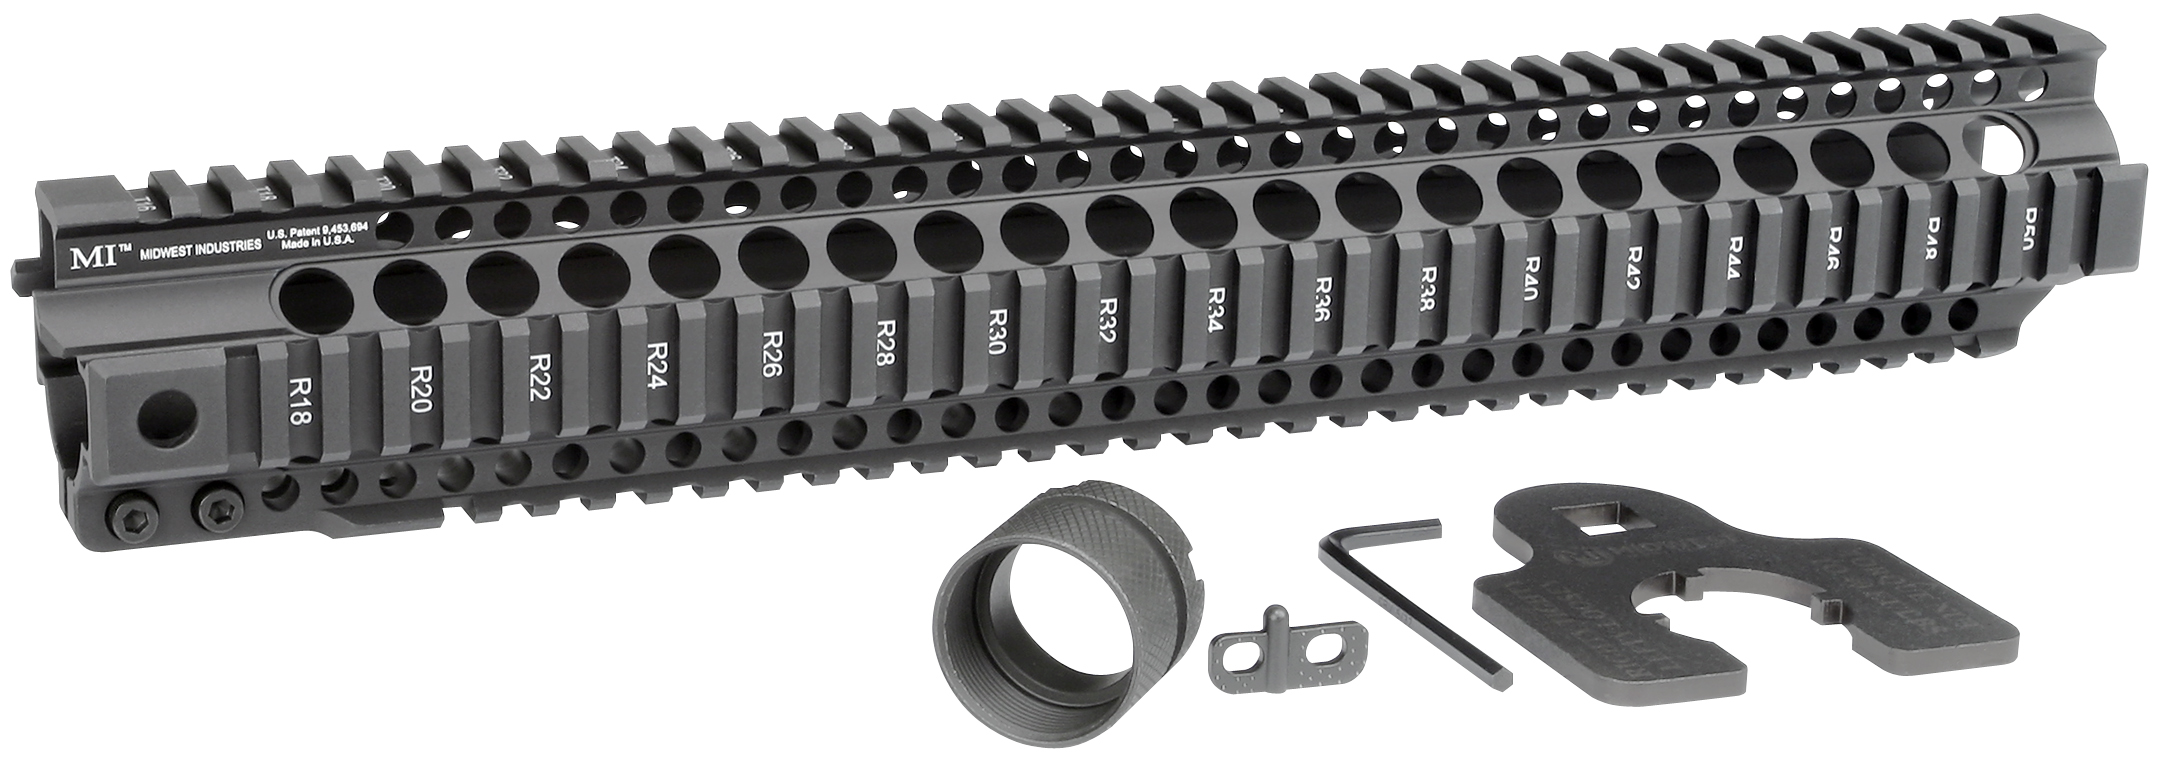 Midwest Industries 15in Combat Rail T-Series One Piece Free Float